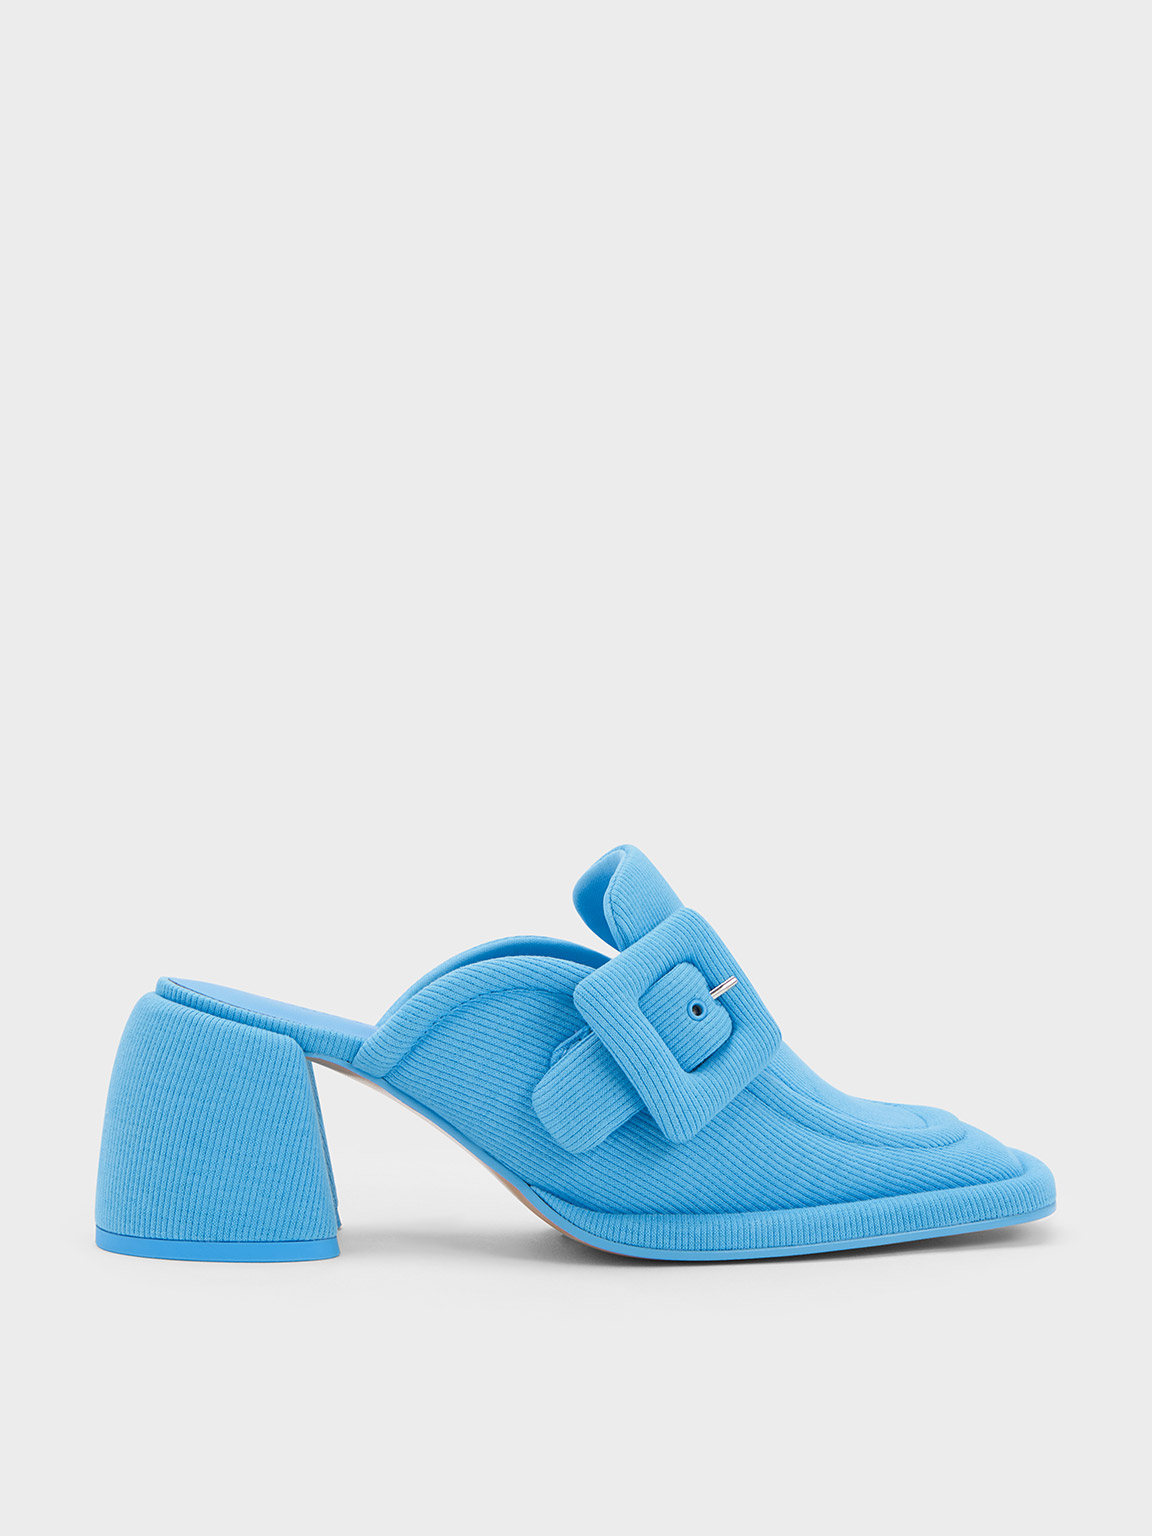 Sinead Woven Buckled Loafer Mules